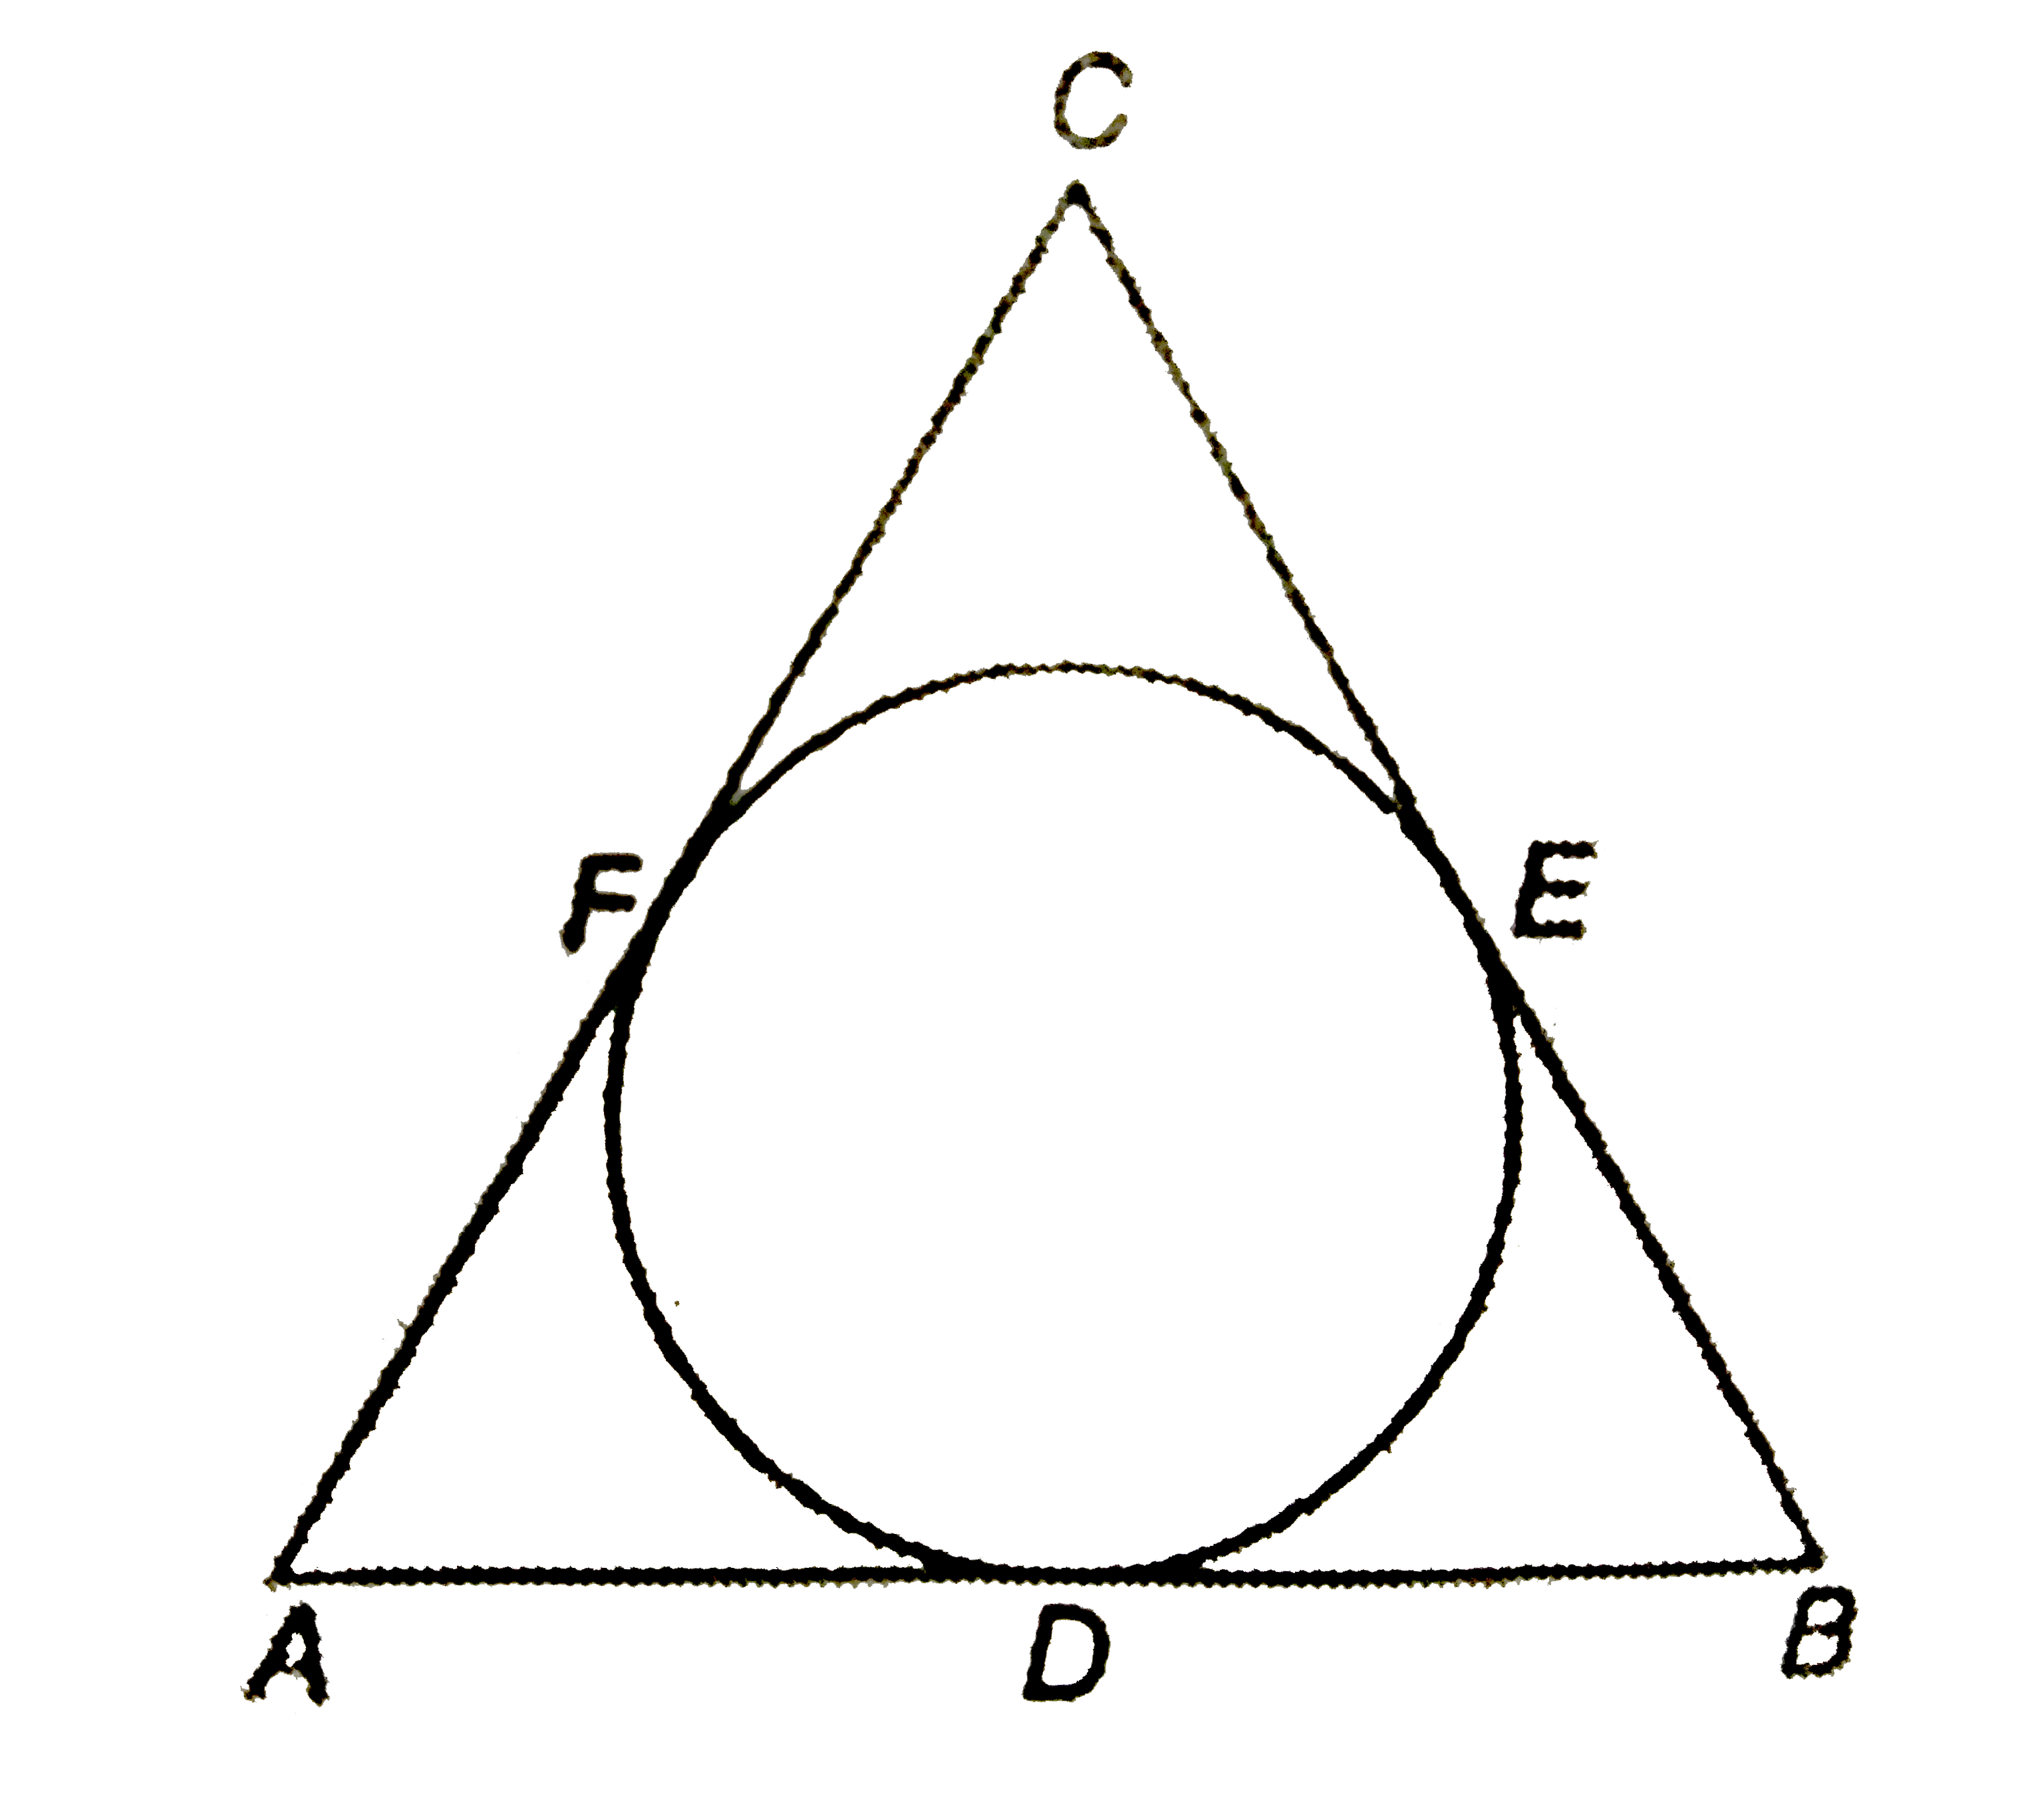 A circle is inscribed in a triangleABC having sides 8 cm, 10 cm and 12 cm as shown in figure. Find AD, BE and CF.